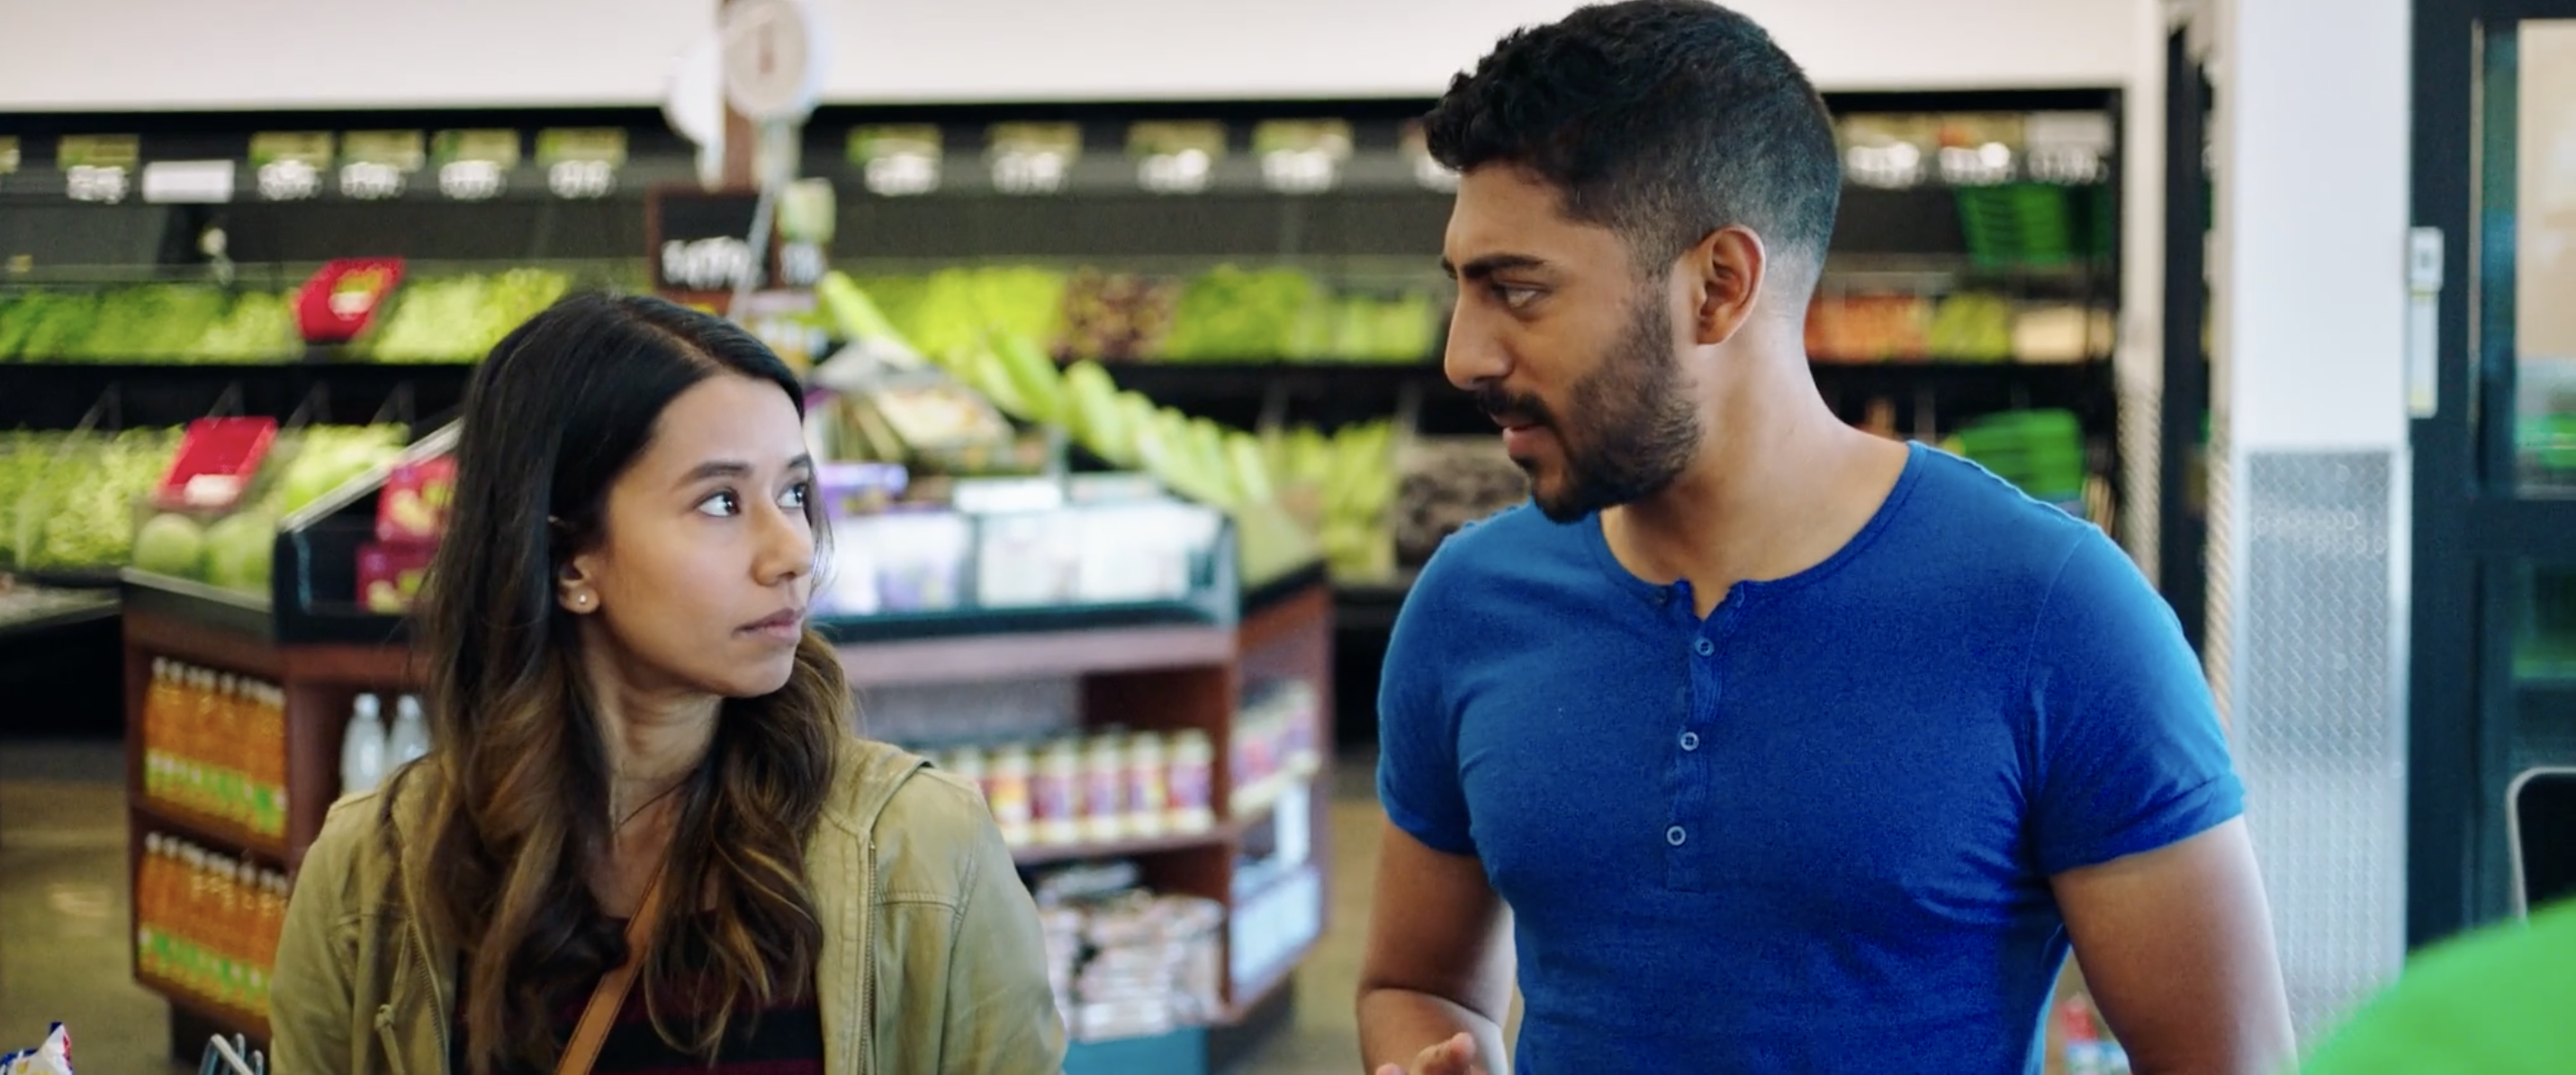 Monica and Sonny looking at one another in a grocery store